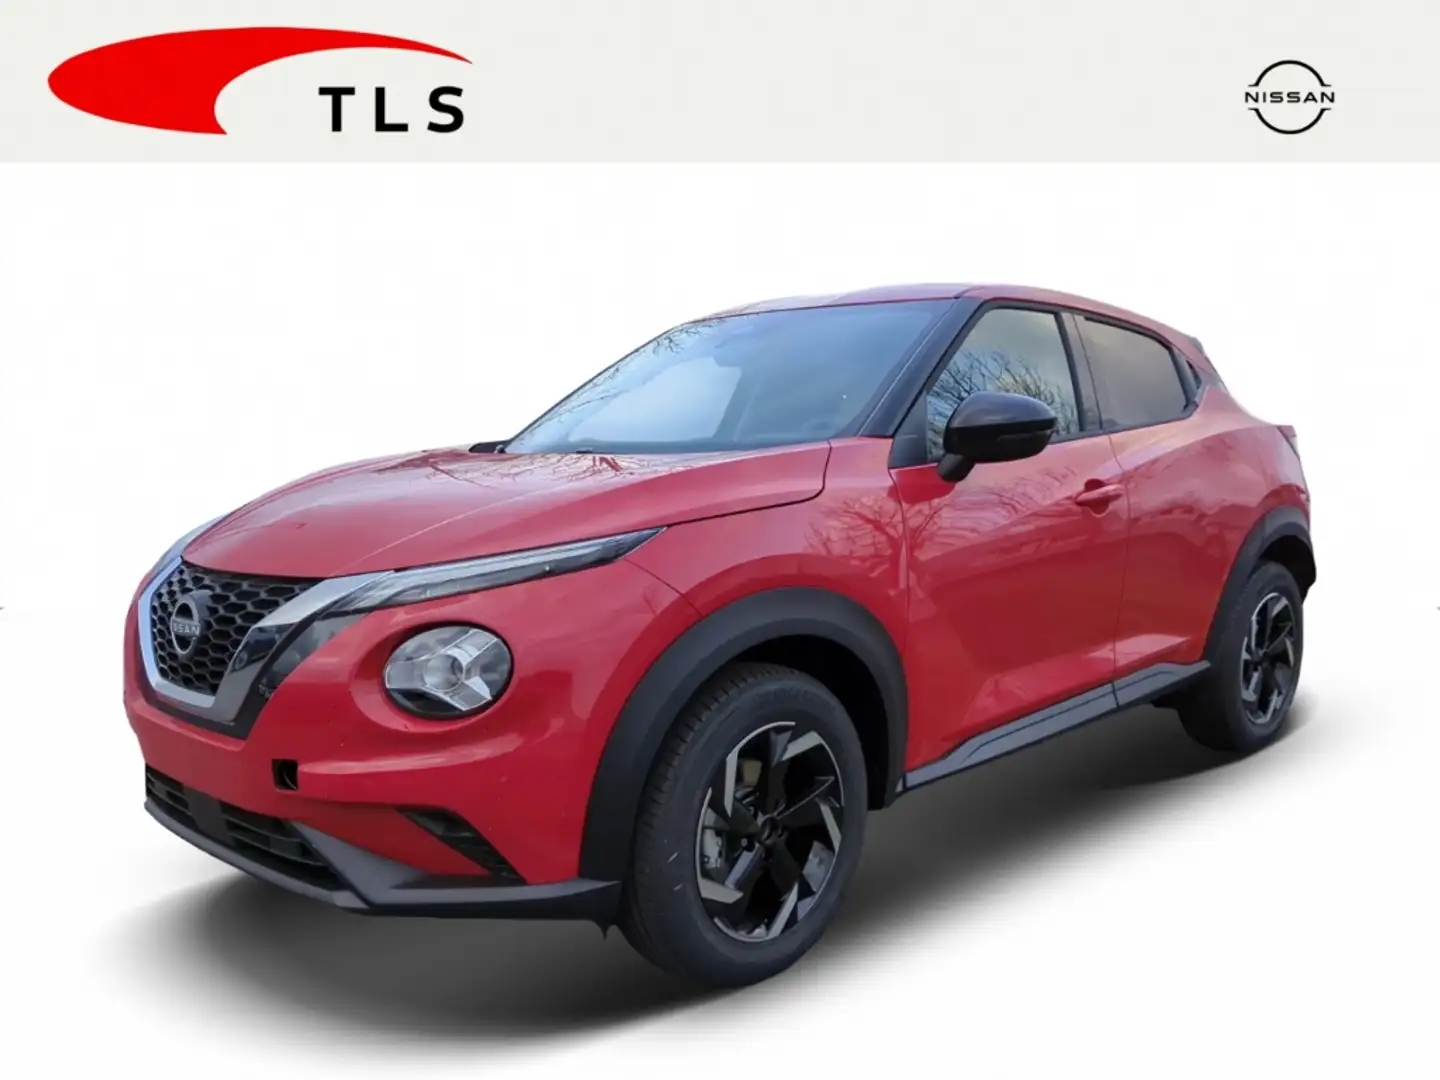 Nissan Juke N-STYLE - 1.0 DIG-T - 114PS - SOLID RED Czerwony - 1